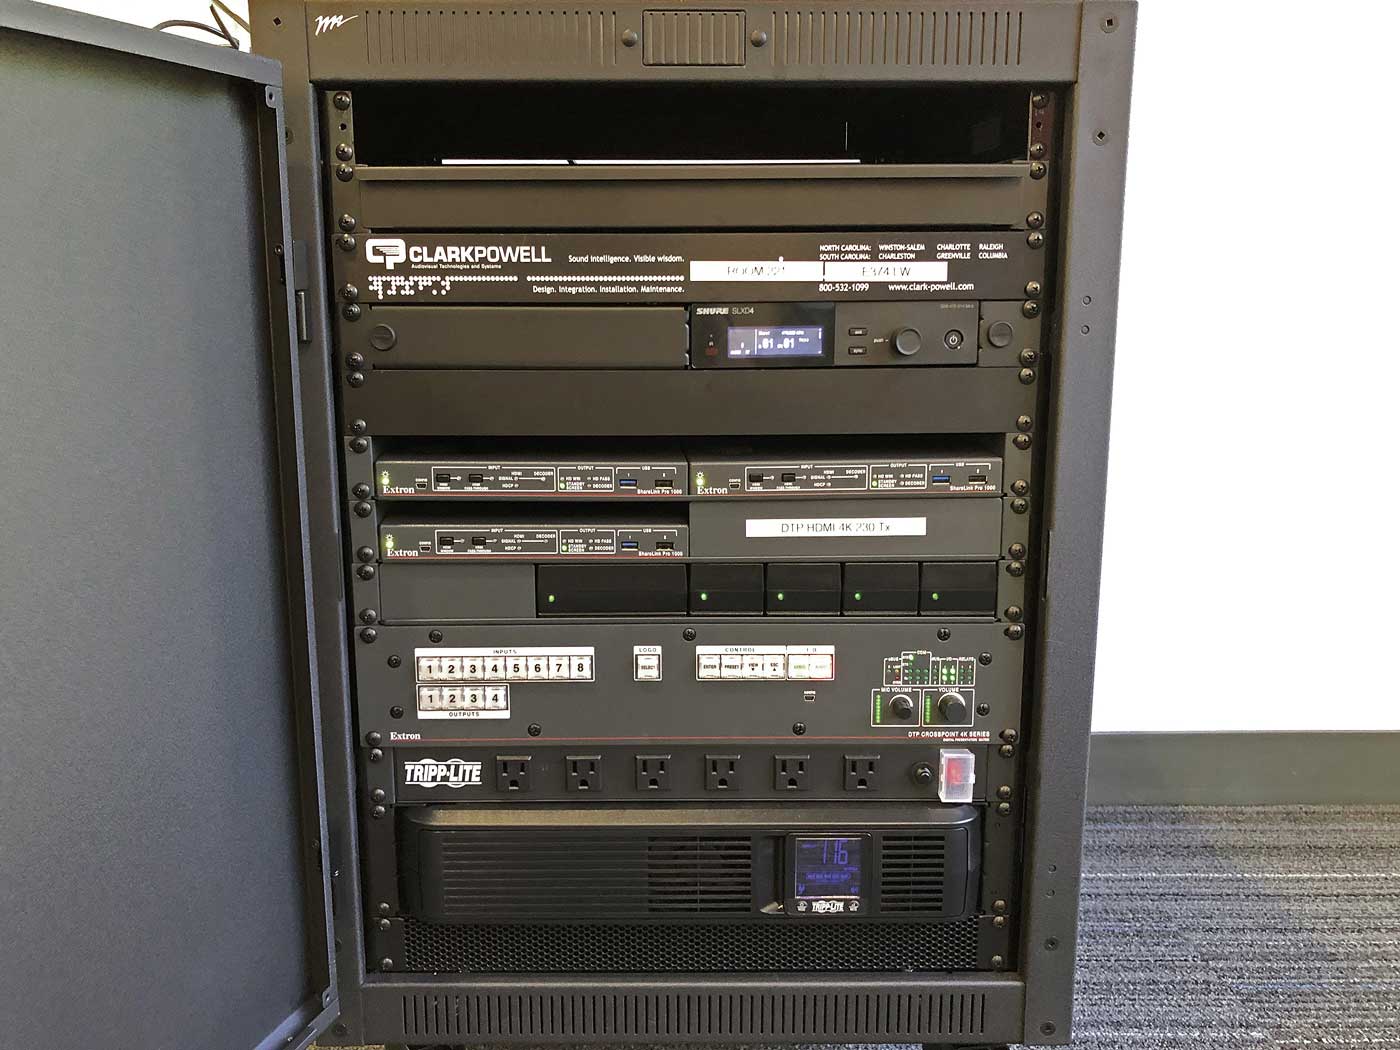 Classroom AV Equipment Rack. The DTP CrossPoint switcher responds to user selections made at a TLP Pro TouchPanel, sending chosen content to each screen.